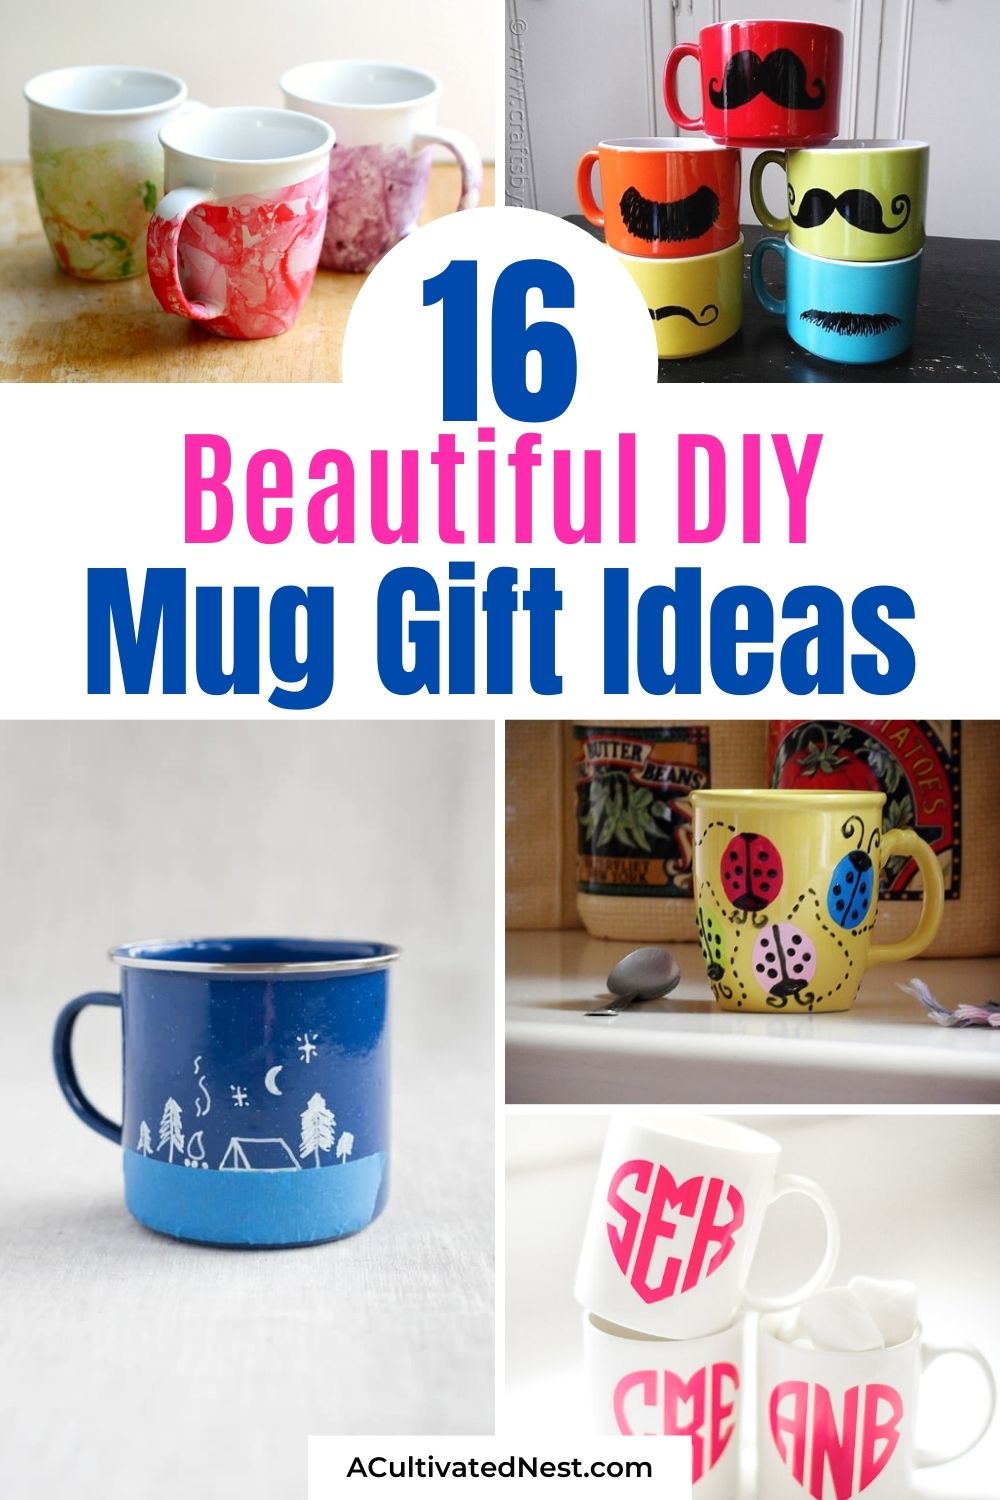 16 Beautiful DIY Mug Gifts- If you want the perfect gift for Mother's Day, Father's Day, birthdays, and more, then you have to check out these beautiful DIY mug gifts! | gifts teens can make, easy homemade gifts, handmade gift ideas, #homemadeGift #paintedMugs #giftIdeas #diyGifts #ACultivatedNest